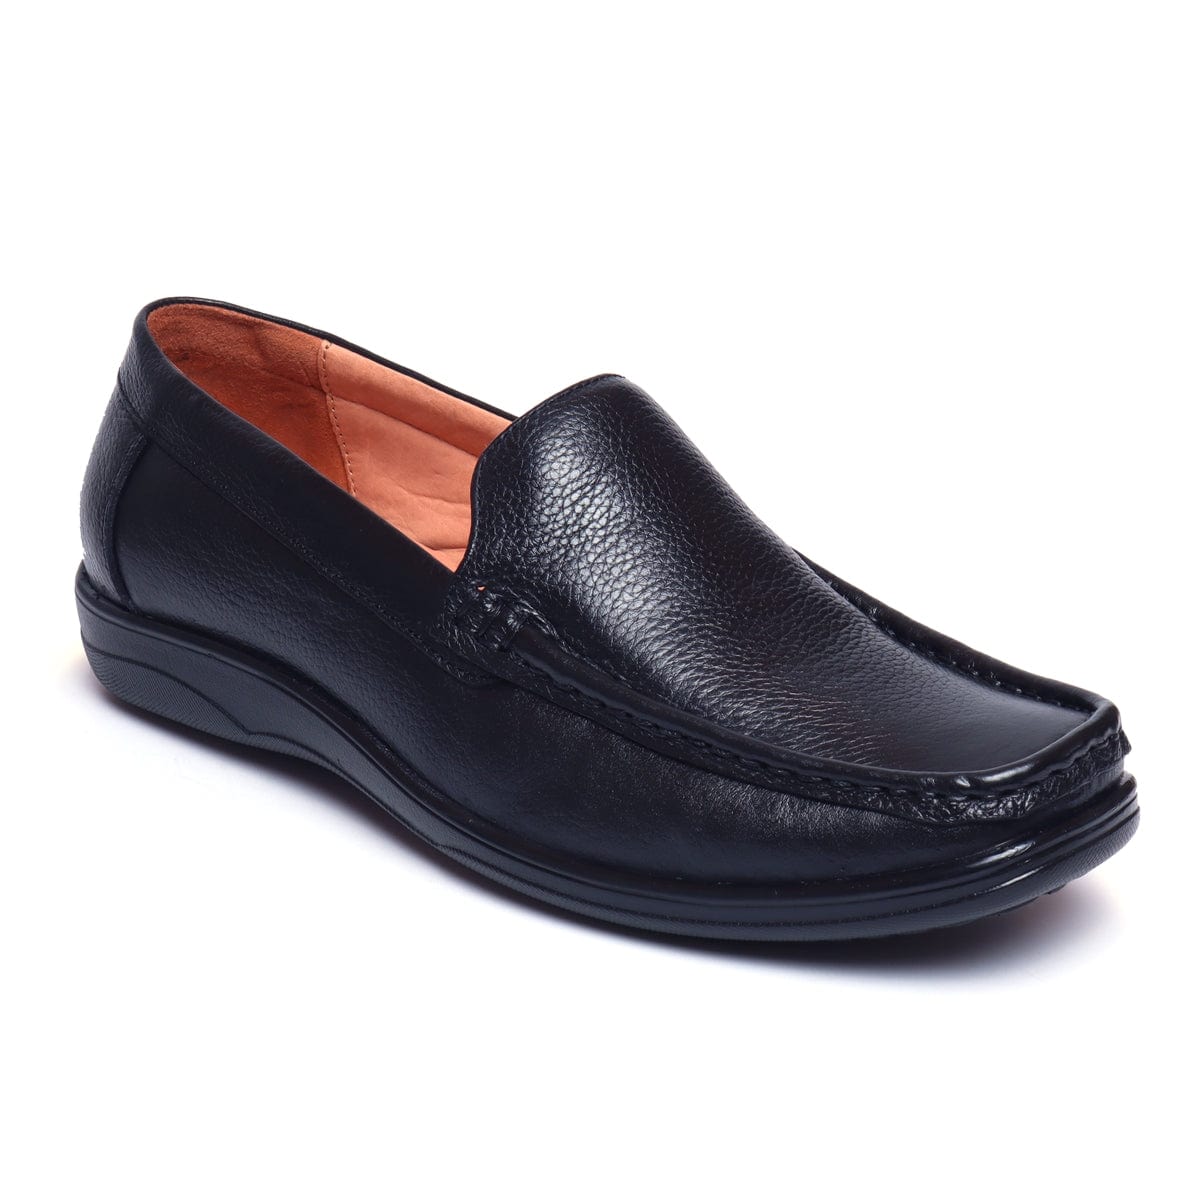 Stylish Black Leather Formal Shoes for Men D - 121 – Zoom Shoes India